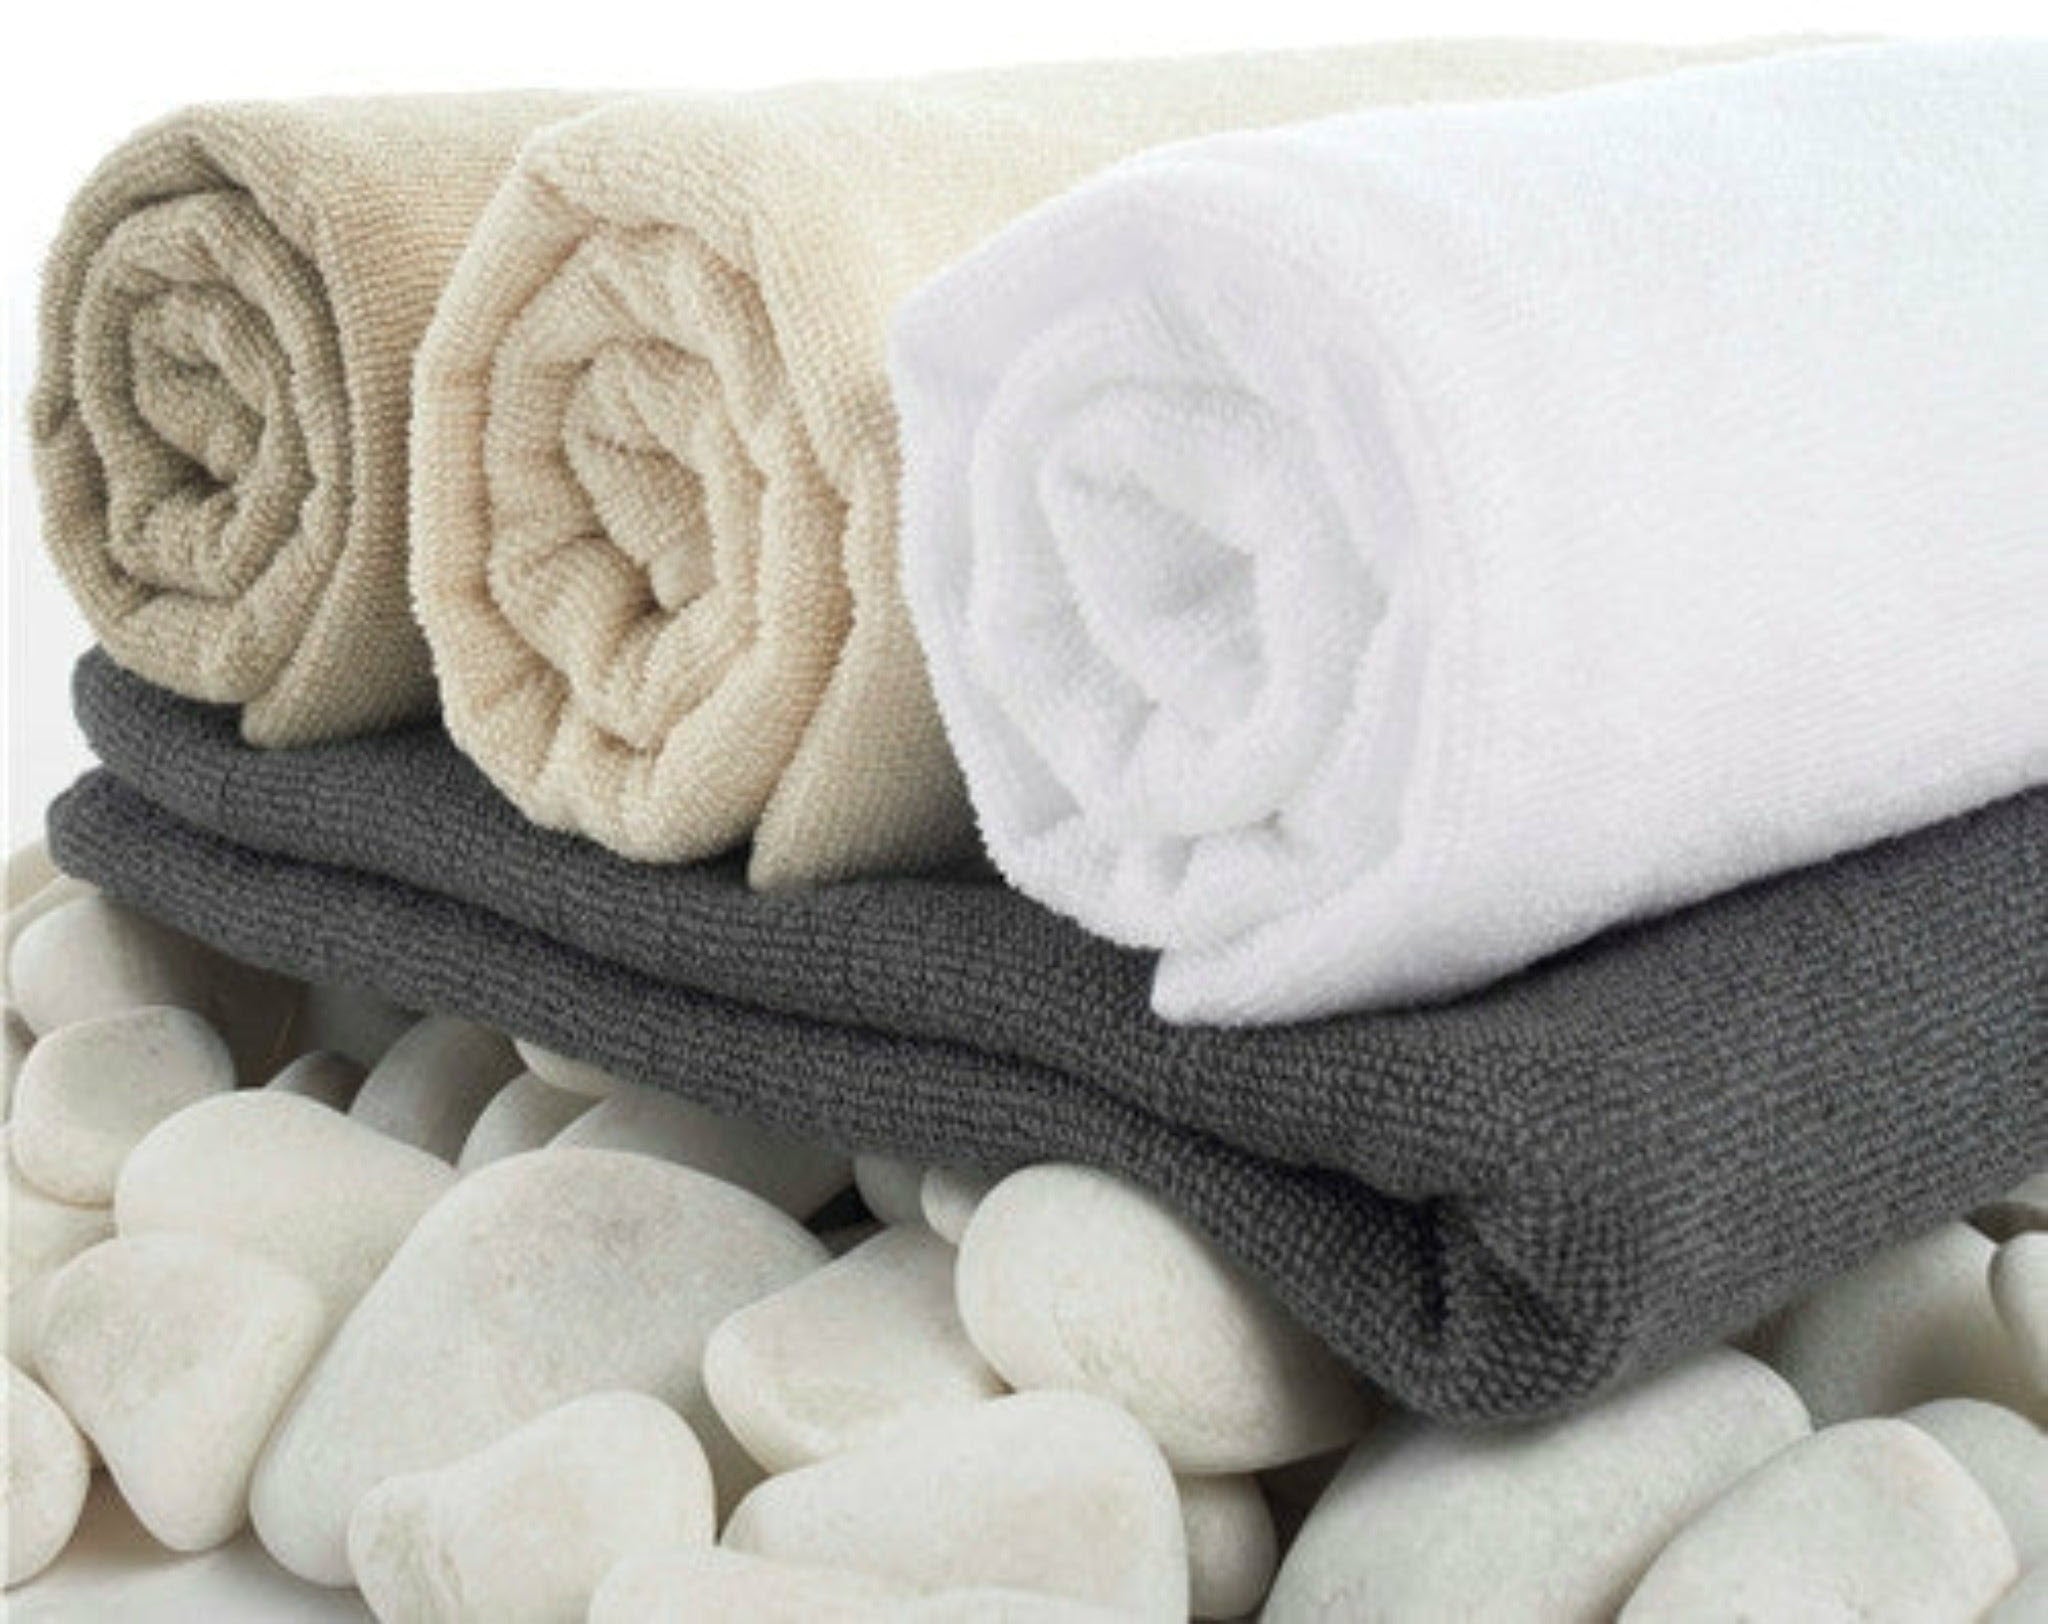 7 Best Waffle Towels of 2023, According to Experts